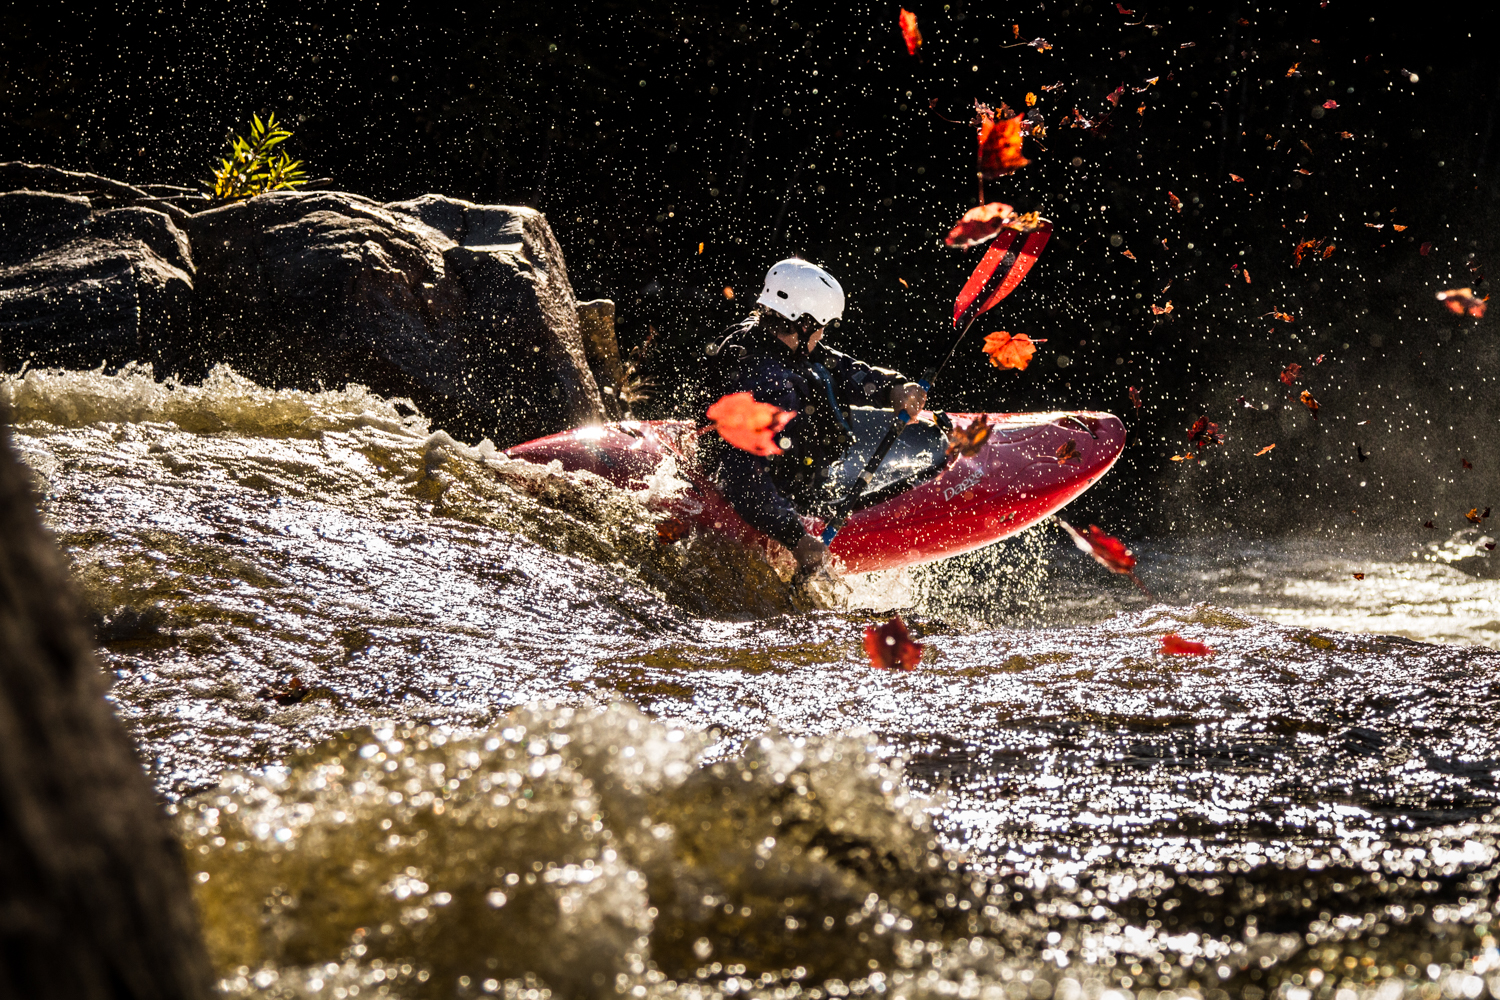 Whitewater kayaking in Quebec’s autumn colors